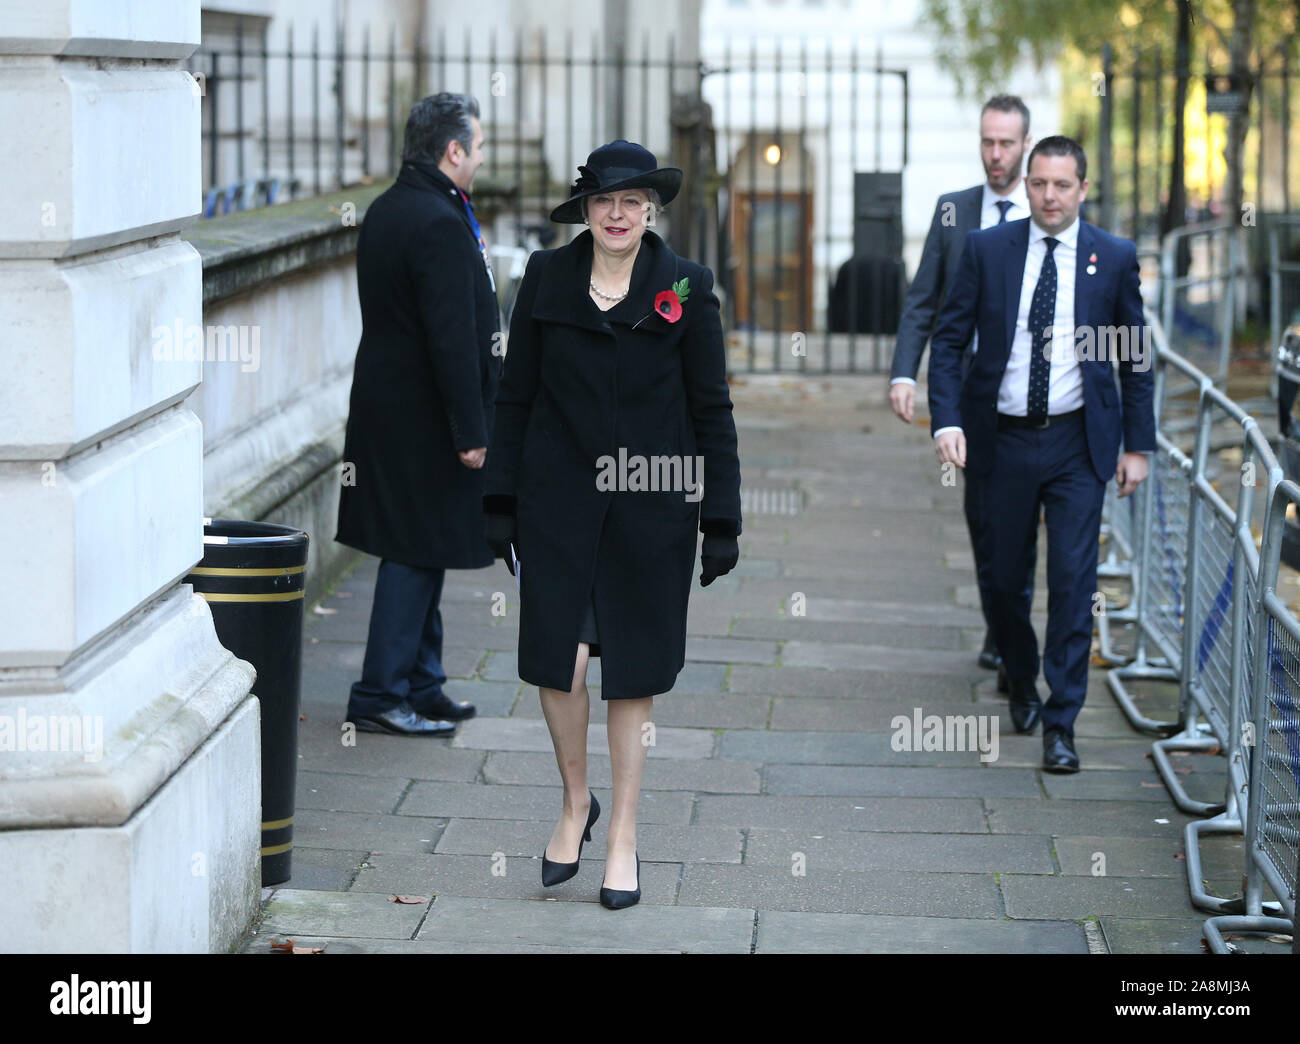 Former Prime Minister Theresa May in Downing Street arriving for the Remembrance Sunday service at the Cenotaph memorial in Whitehall, central London. PA Photo. Picture date: Sunday November 10, 2019. See PA story ROYAL Remembrance. Photo credit should read: Jonathan Brady/PA Wire Stock Photo